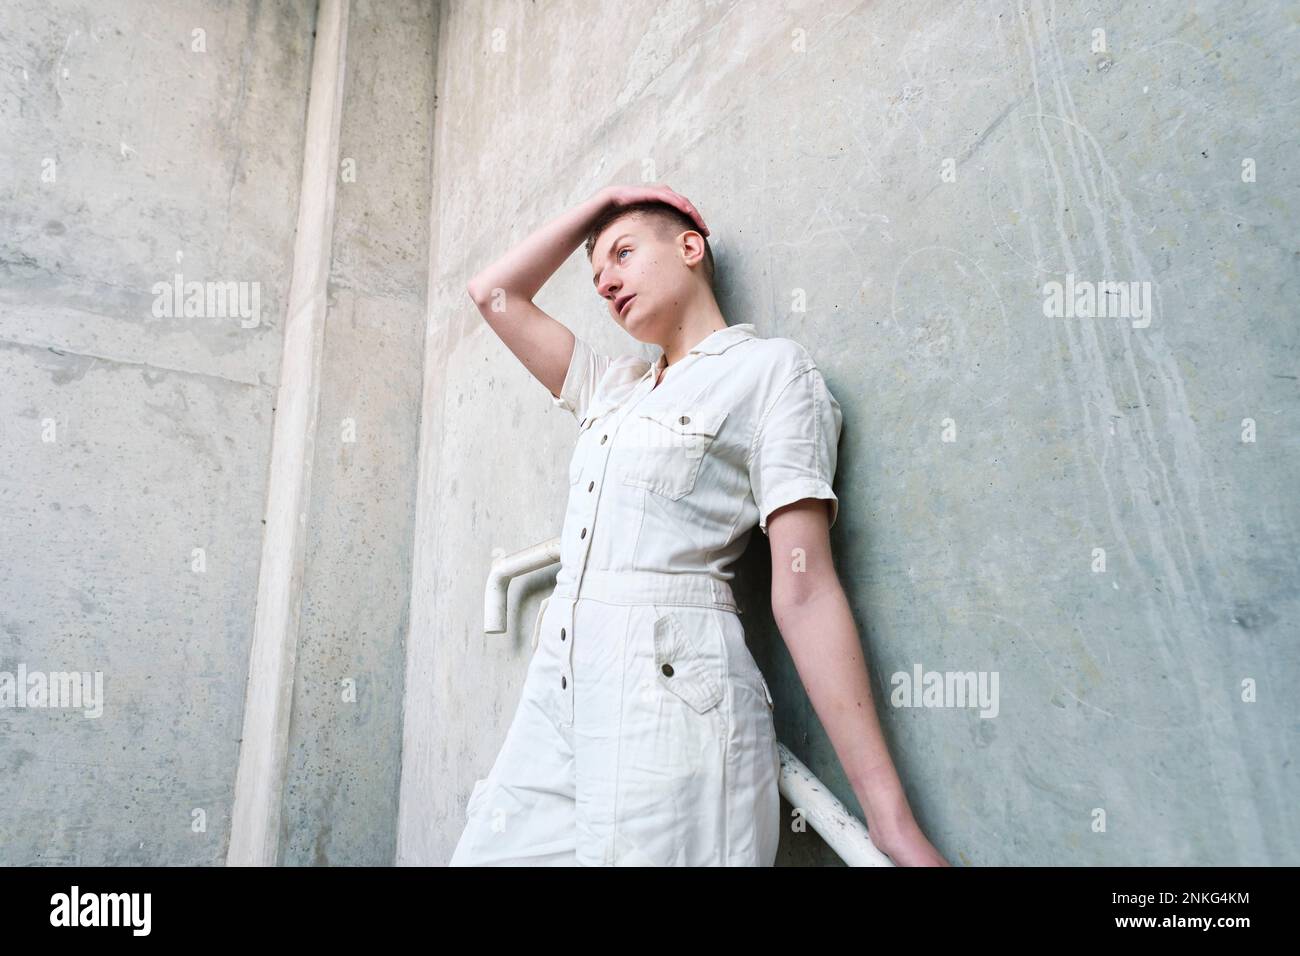 Thoughtful non-binary person leaning on wall Stock Photo